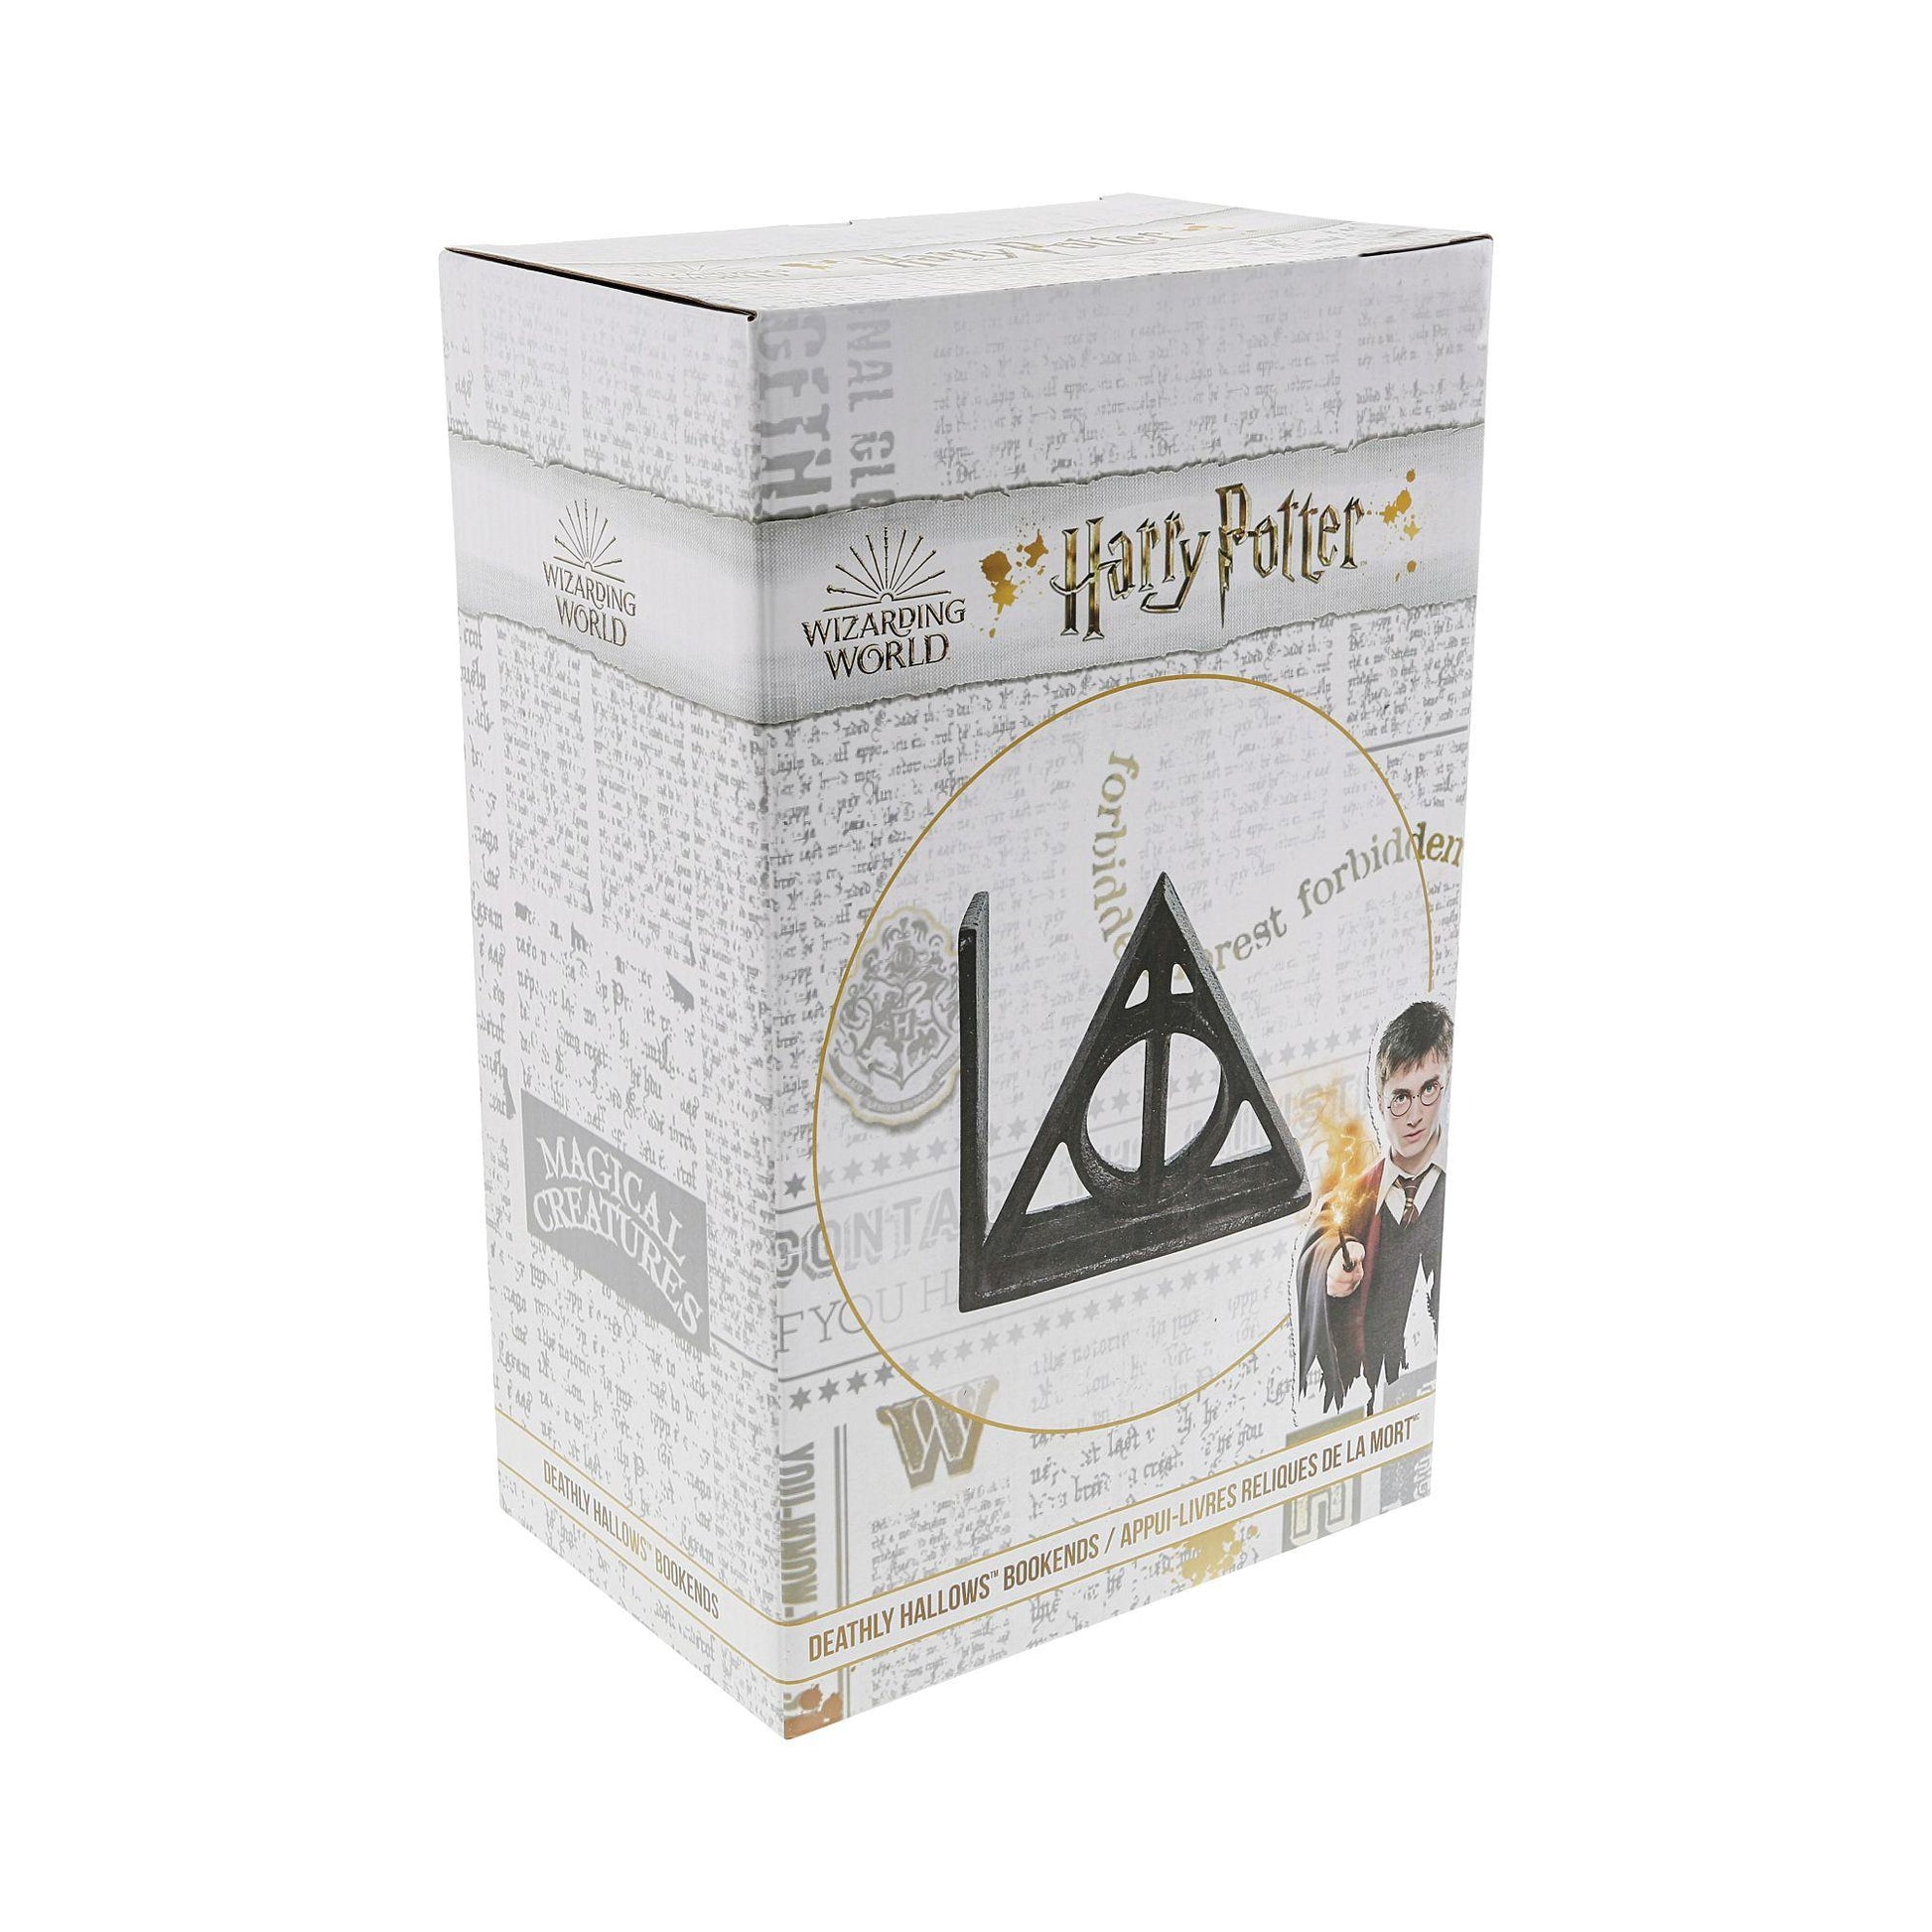 Harry Potter And The Deathly Hallows Pt 1 & 2 Promotional Goodies Box 